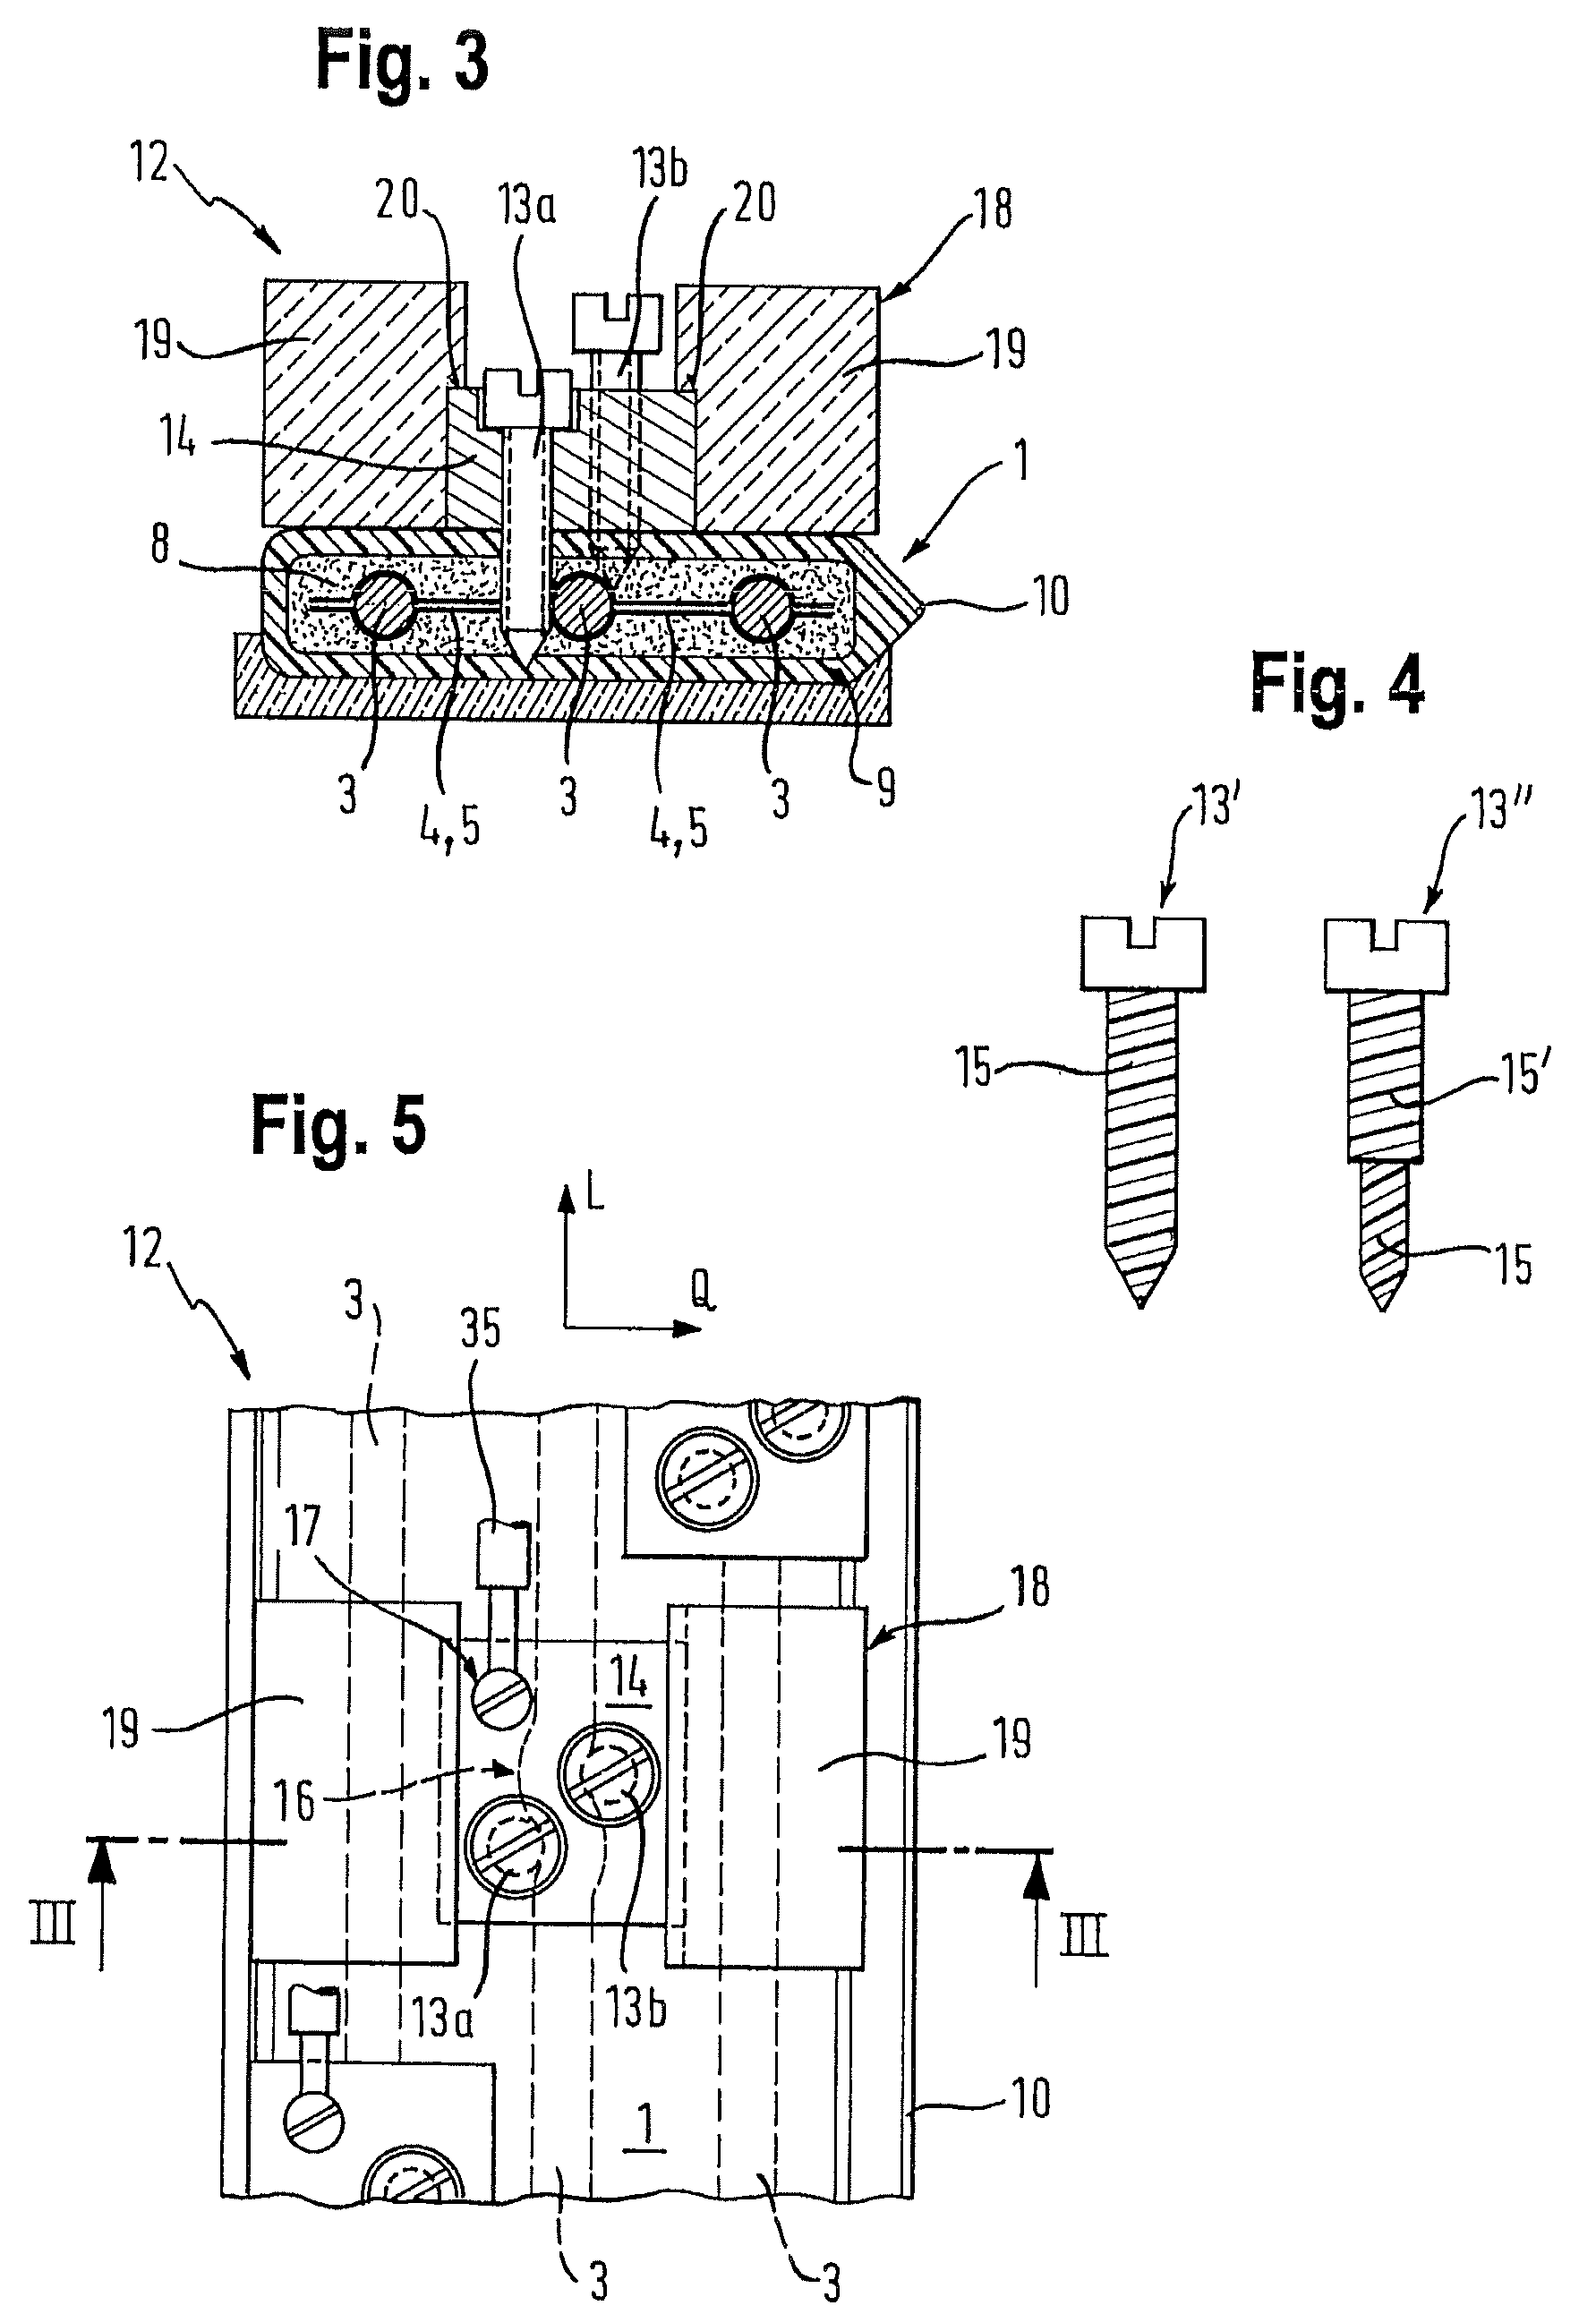 Connection device and installation kit for electrical installation with circuit integrity in case of fire